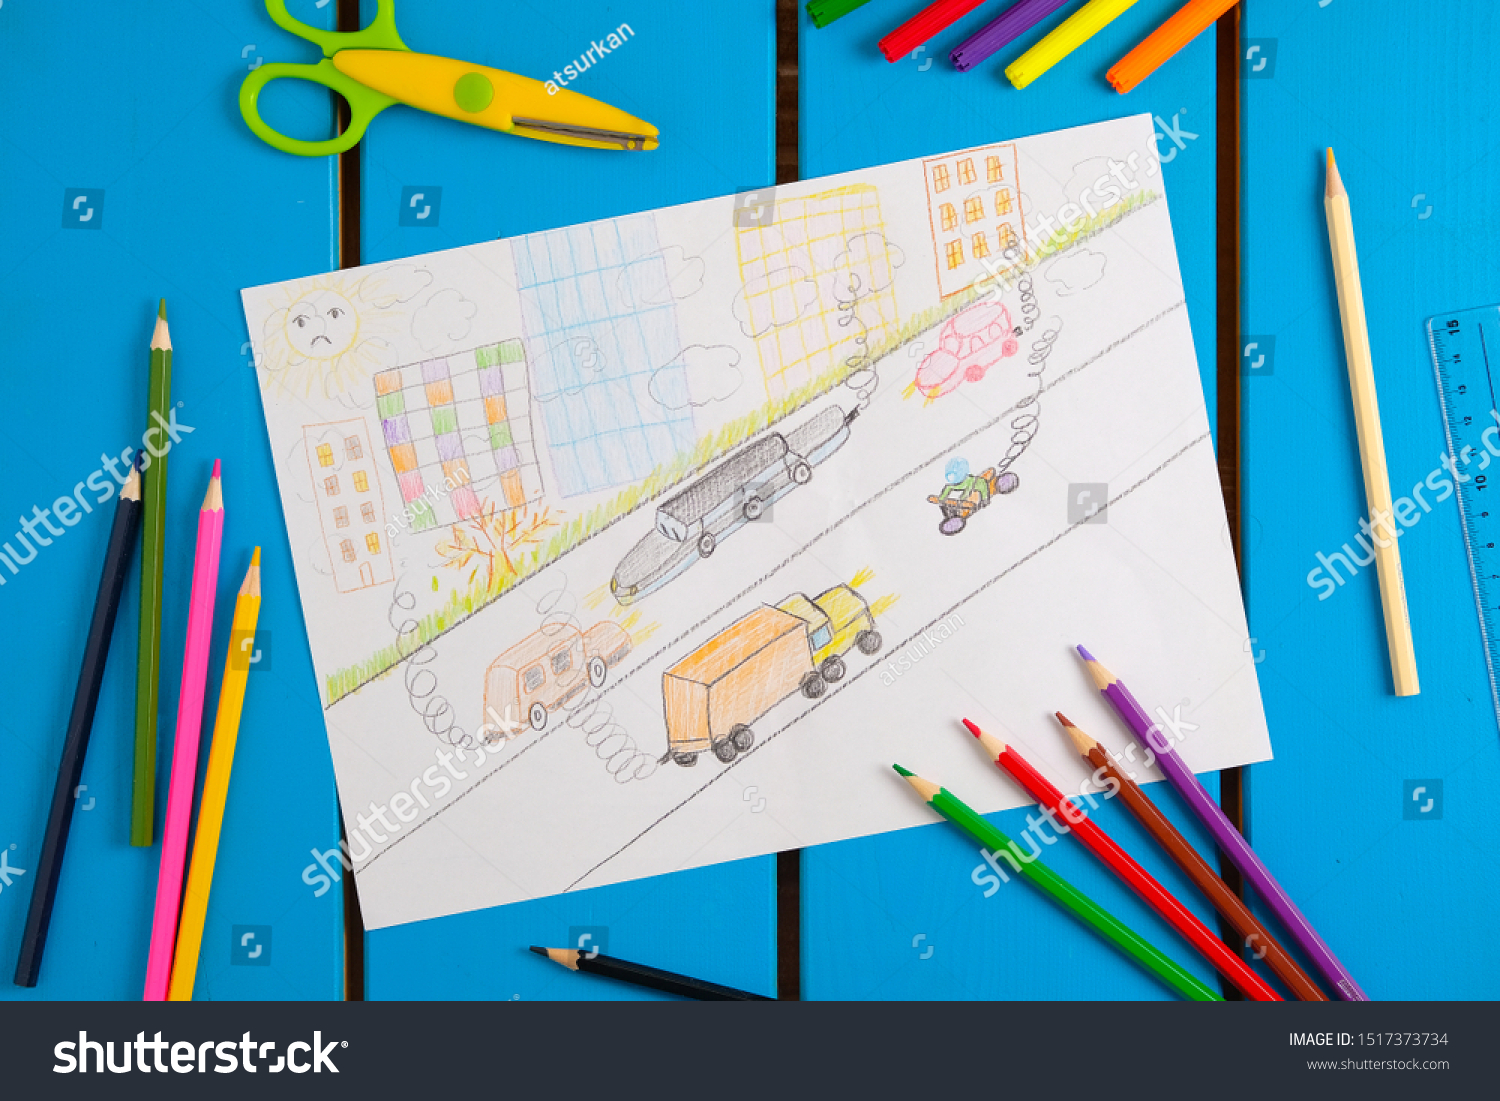 Child draws a pencil drawing of the city, cars and air pollution. Top view. #1517373734